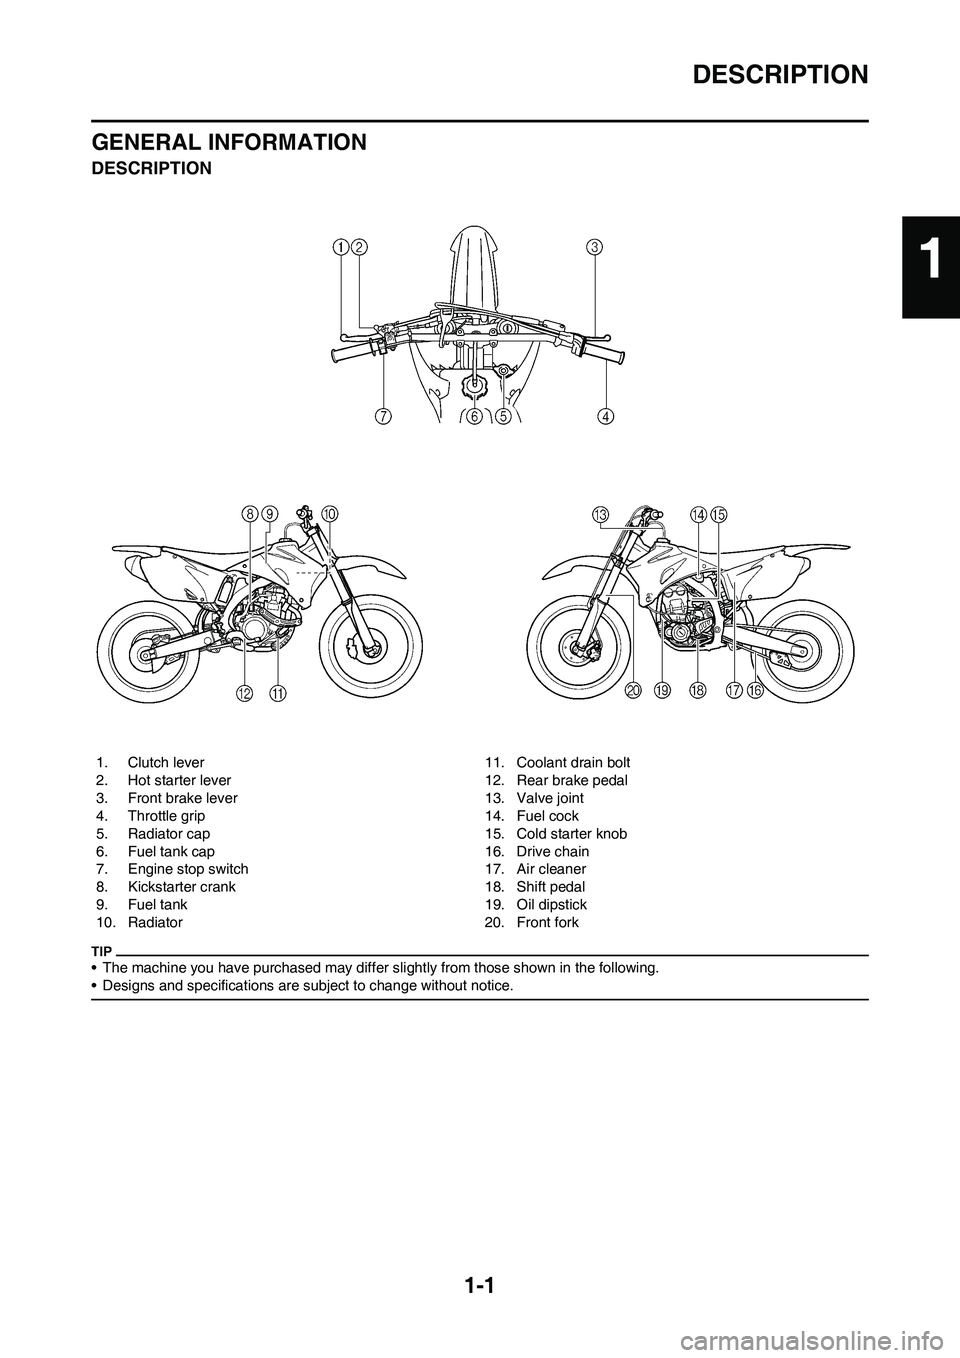 YAMAHA YZ450F 2009 User Guide 1-1
DESCRIPTION
GENERAL INFORMATION
DESCRIPTION
• The machine you have purchased may differ slightly from those shown in the following.
• Designs and specifications are subject to change without n